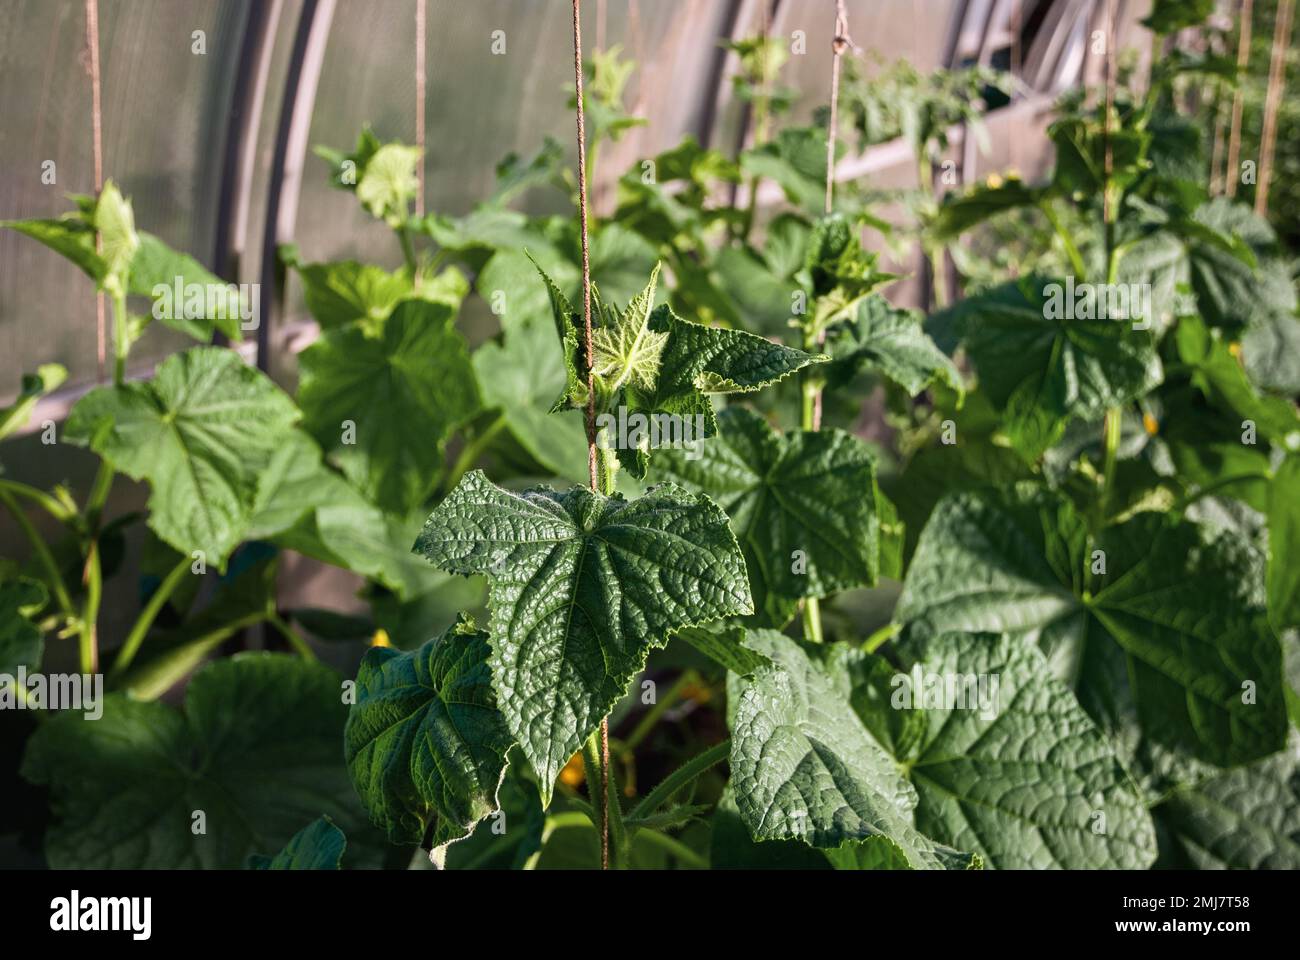 Cucumber plants growing in greenhouse, cucumber vines, plant support string Stock Photo